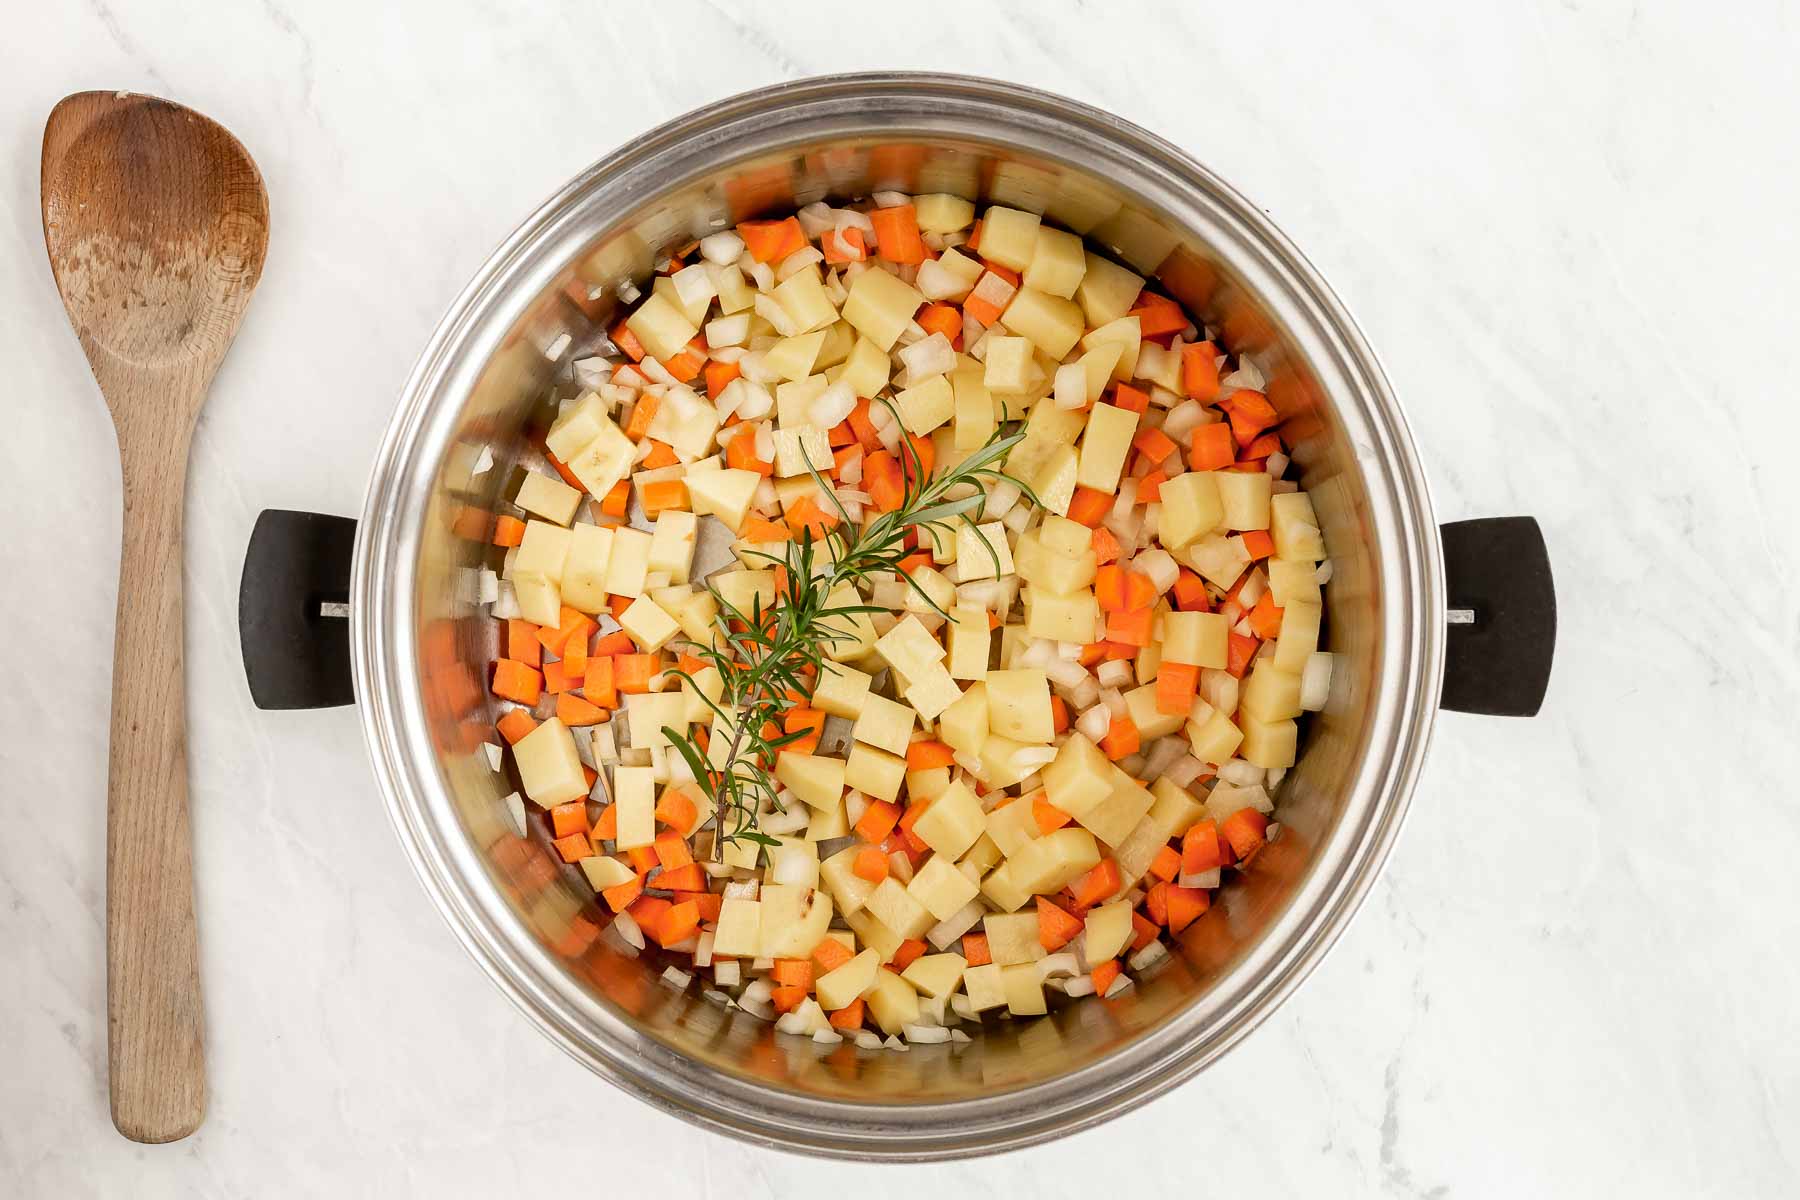 Onions, carrot and potato with a rosemary sprig sautéing in a soup pot.